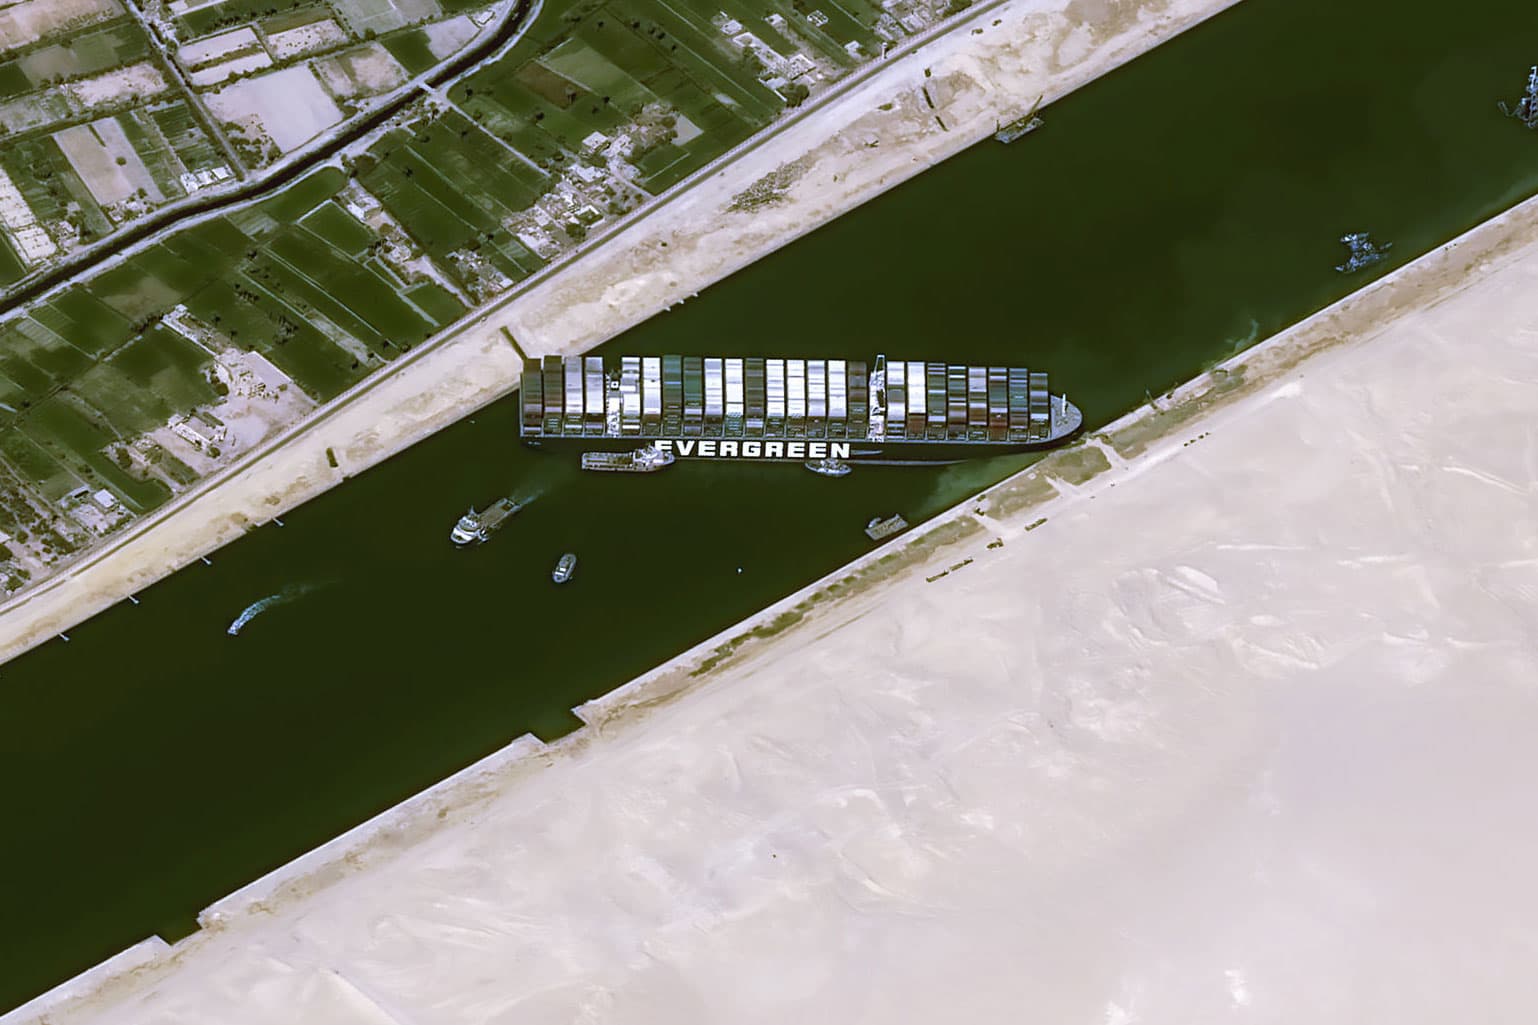 Another attempt to clear ship blocking Suez Canal fails as economic impact mounts